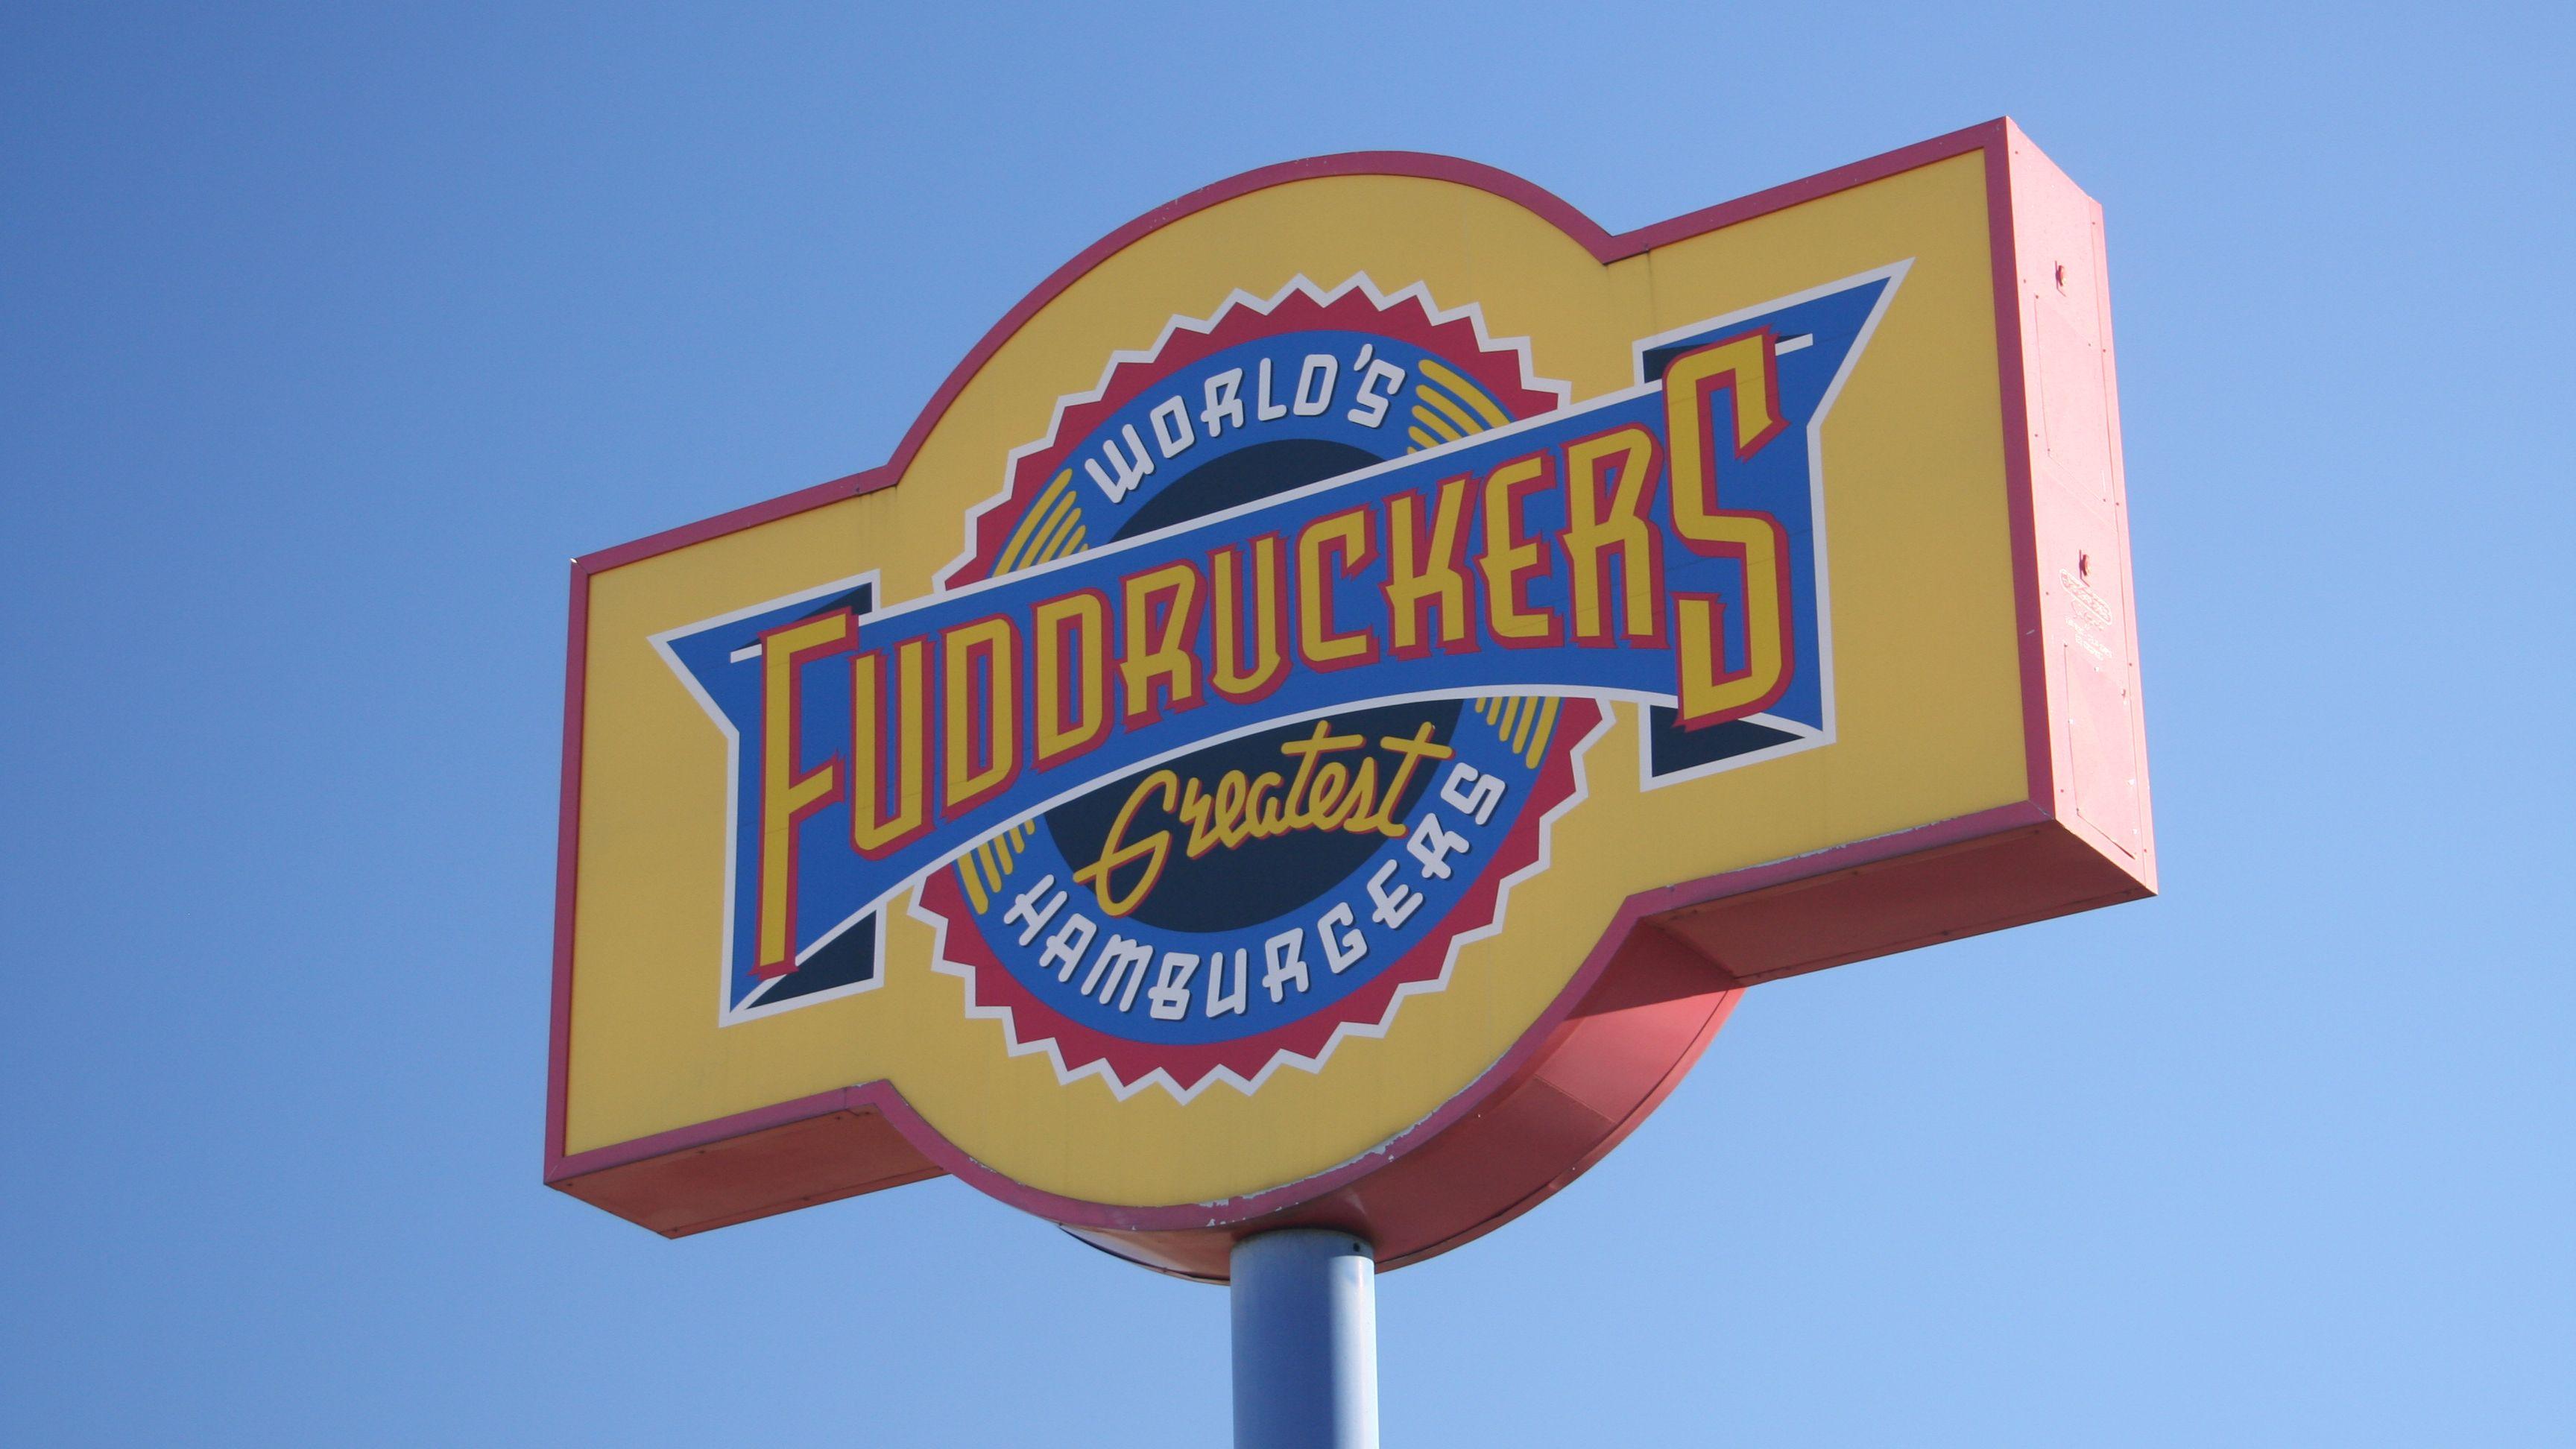 Luby's Logo - Fuddruckers Parent Company Luby's Inc. Names New COO | 1851 Franchise